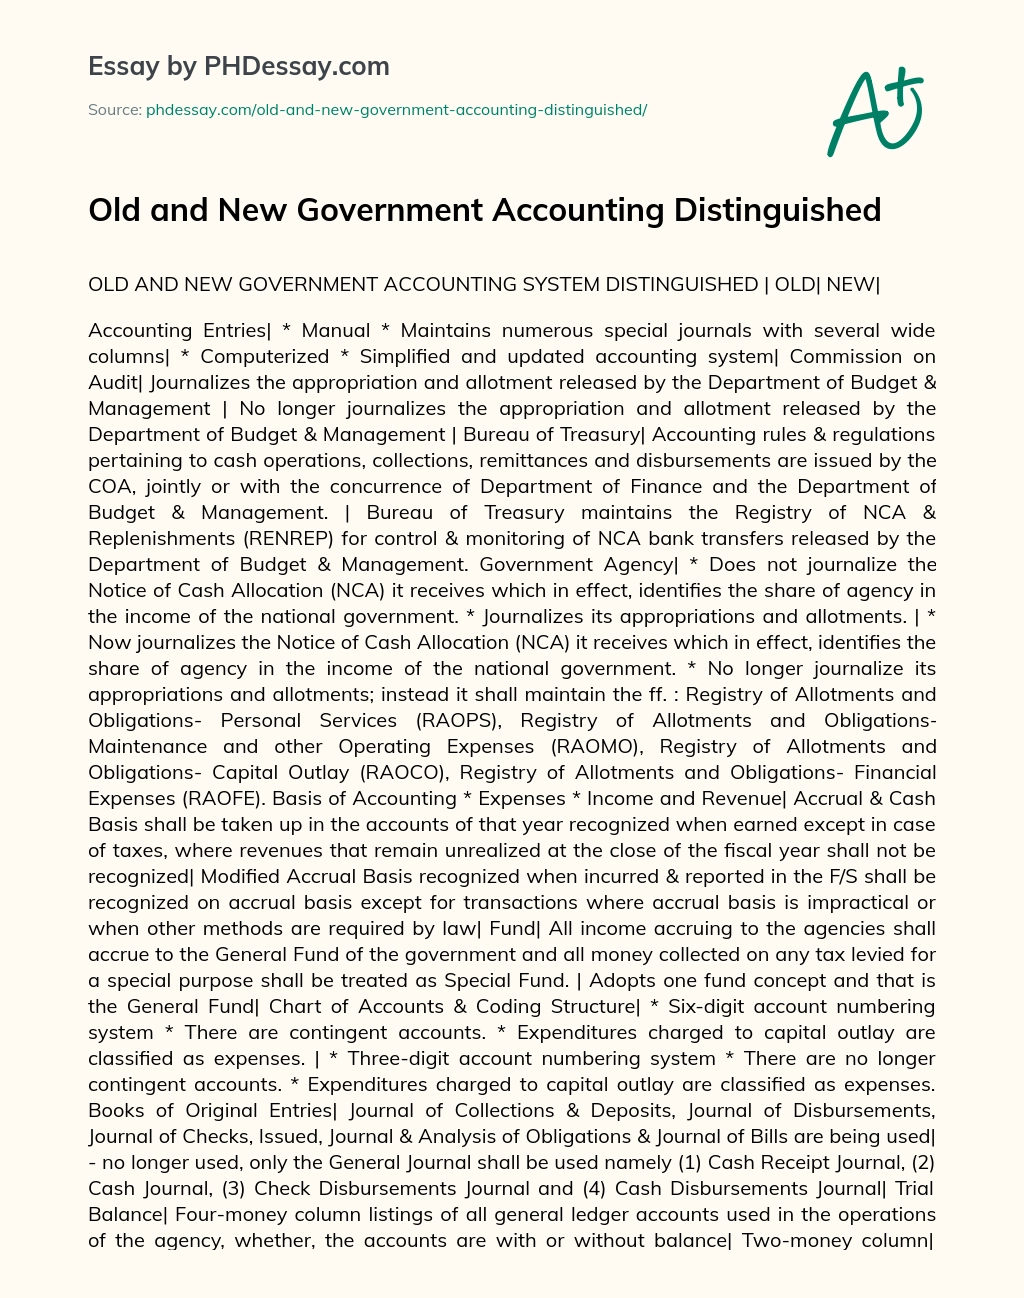 Old and New Government Accounting Distinguished essay